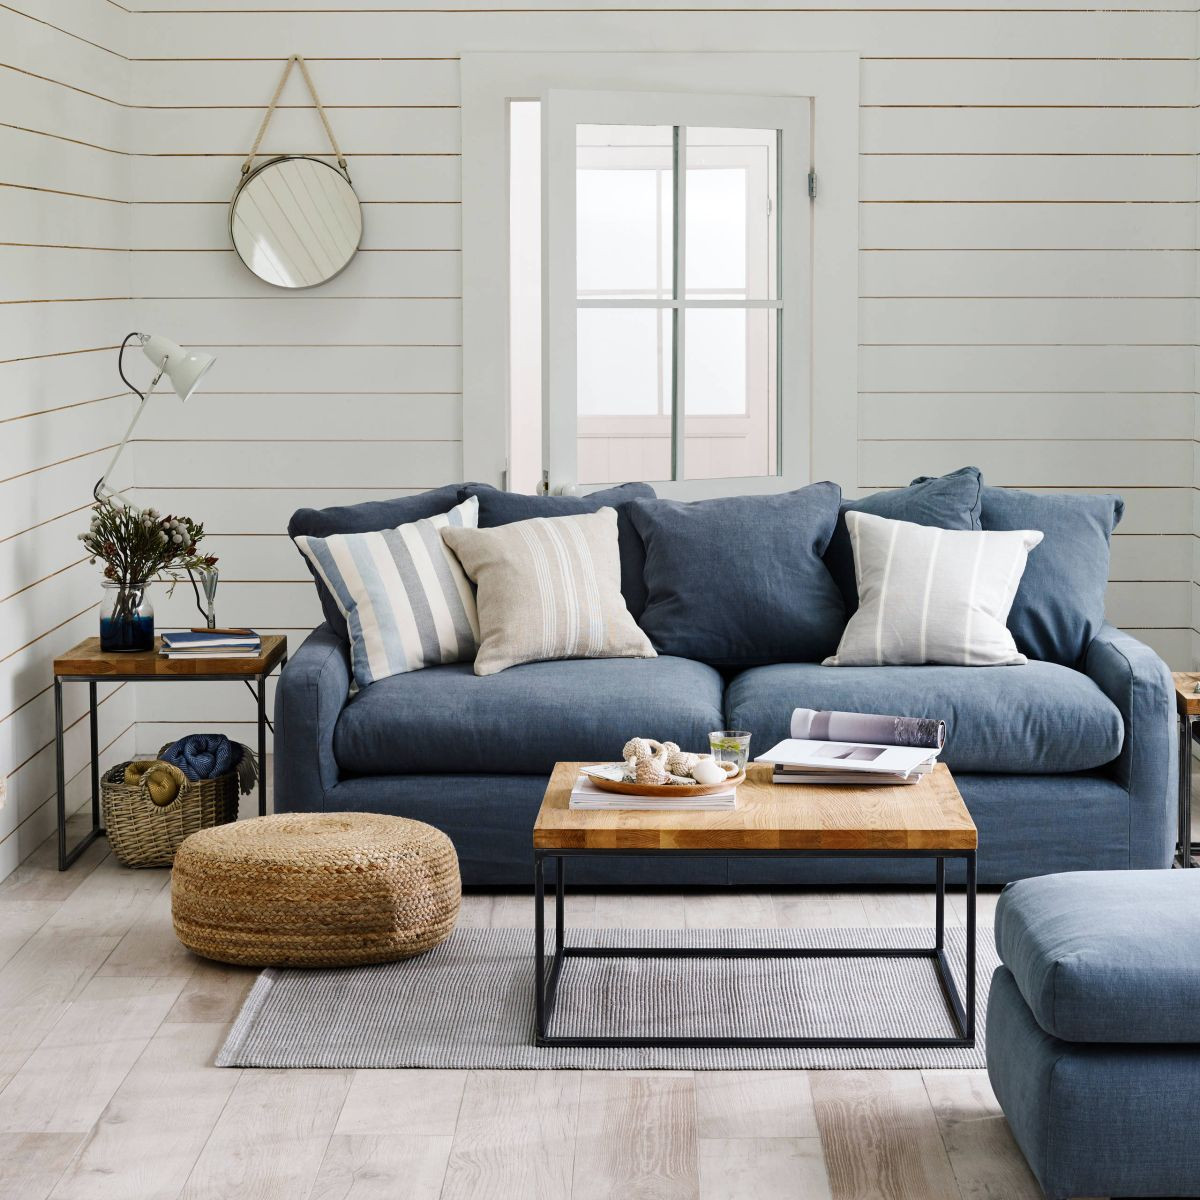 Pictures For Living Room Walls
 5 Reasons To Put Shiplap Walls In Every Room